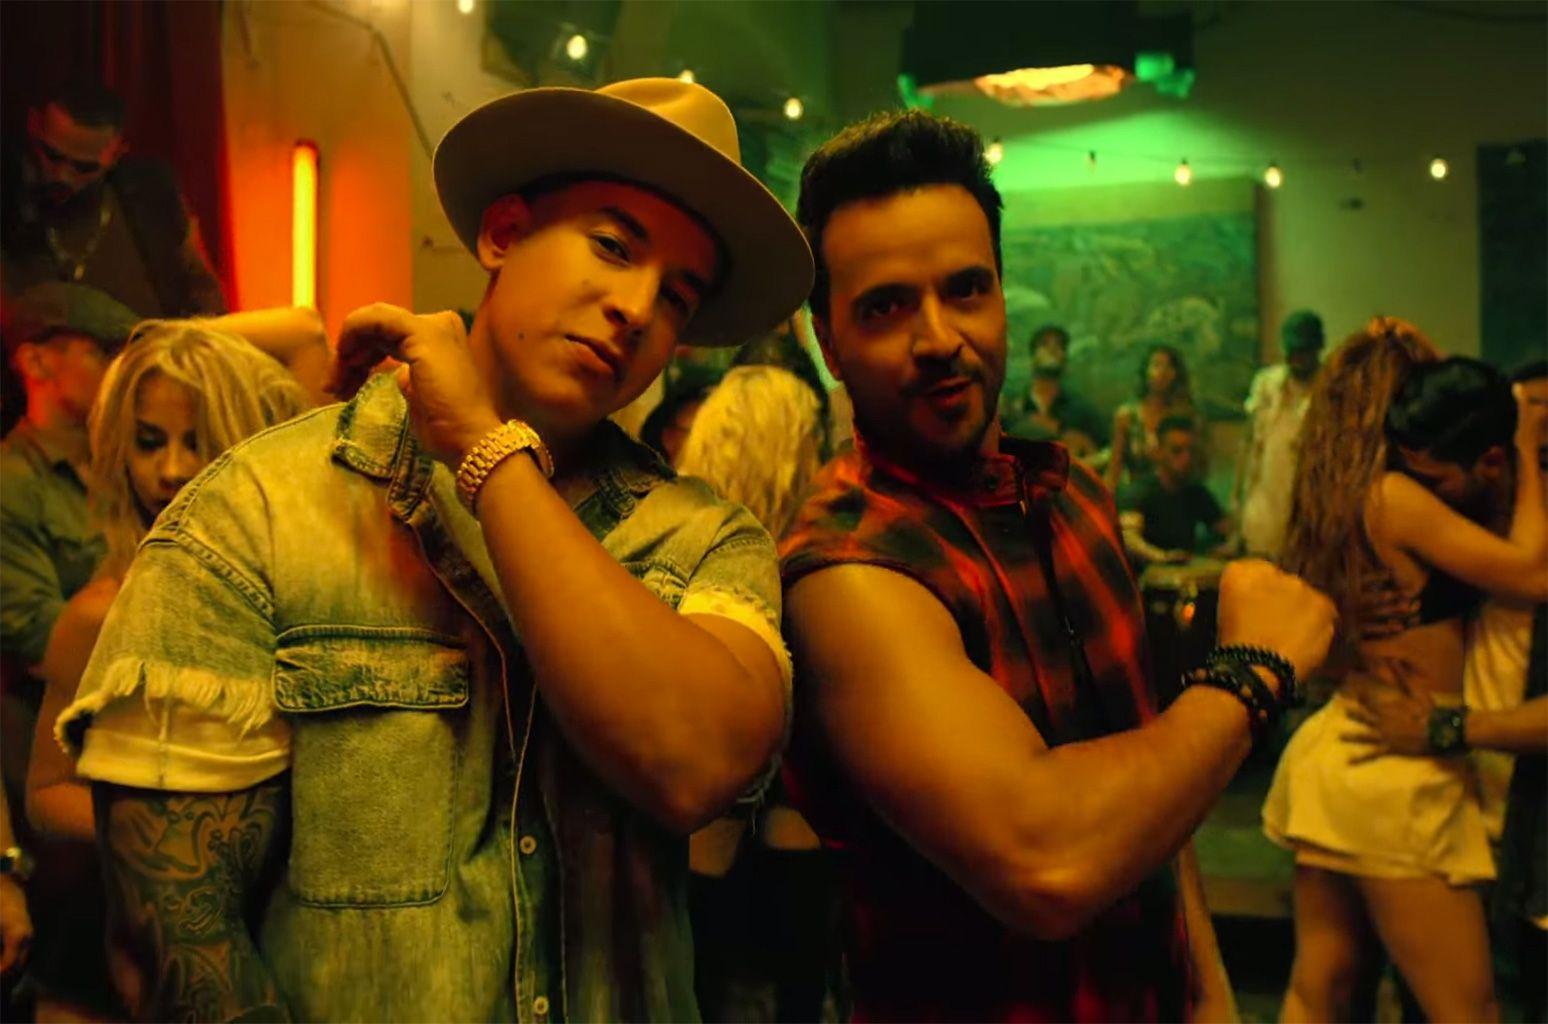 Luis Fonsi & Daddy Yankee's 'Despacito' With Justin Bieber: Fourth